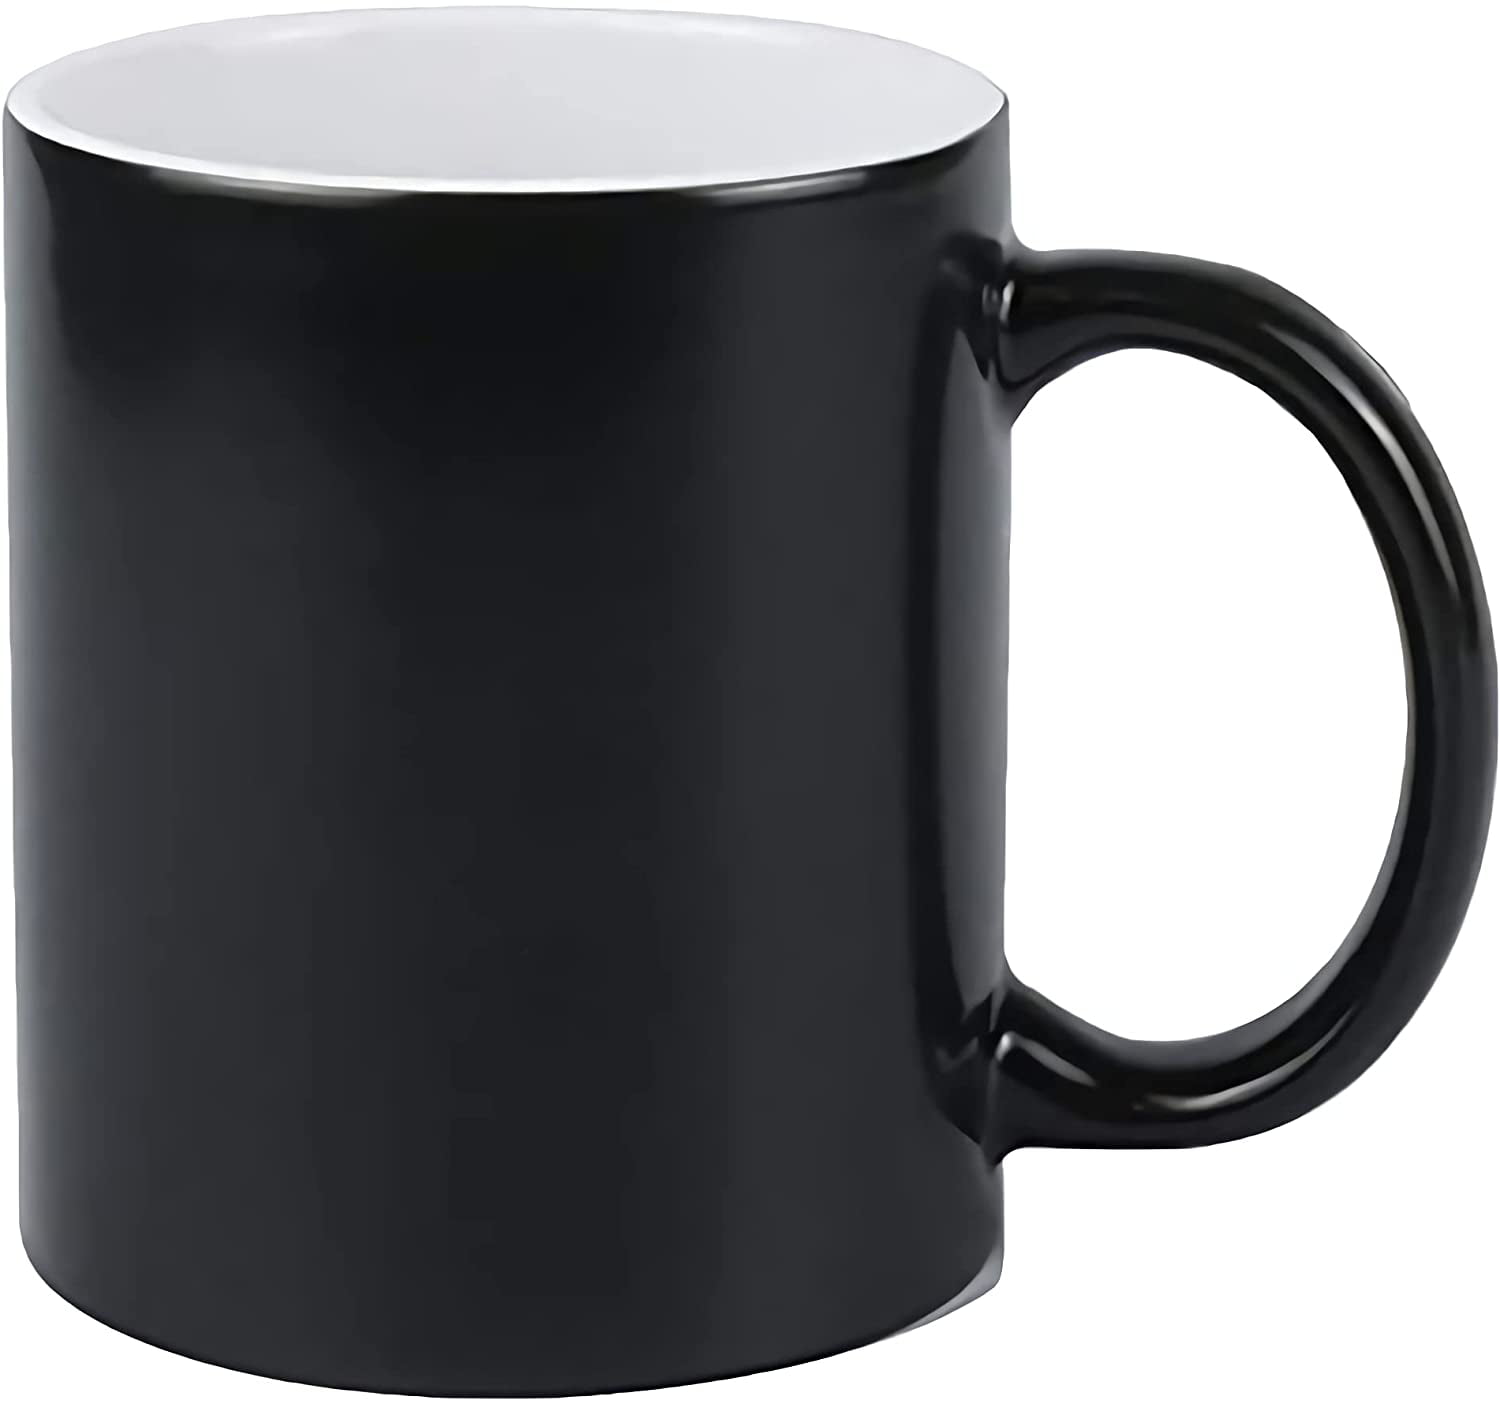 US 36pcs 11oz Blank Sublimation Coffee Mug Color Changing Magic Cup Black Glossy for sale online 